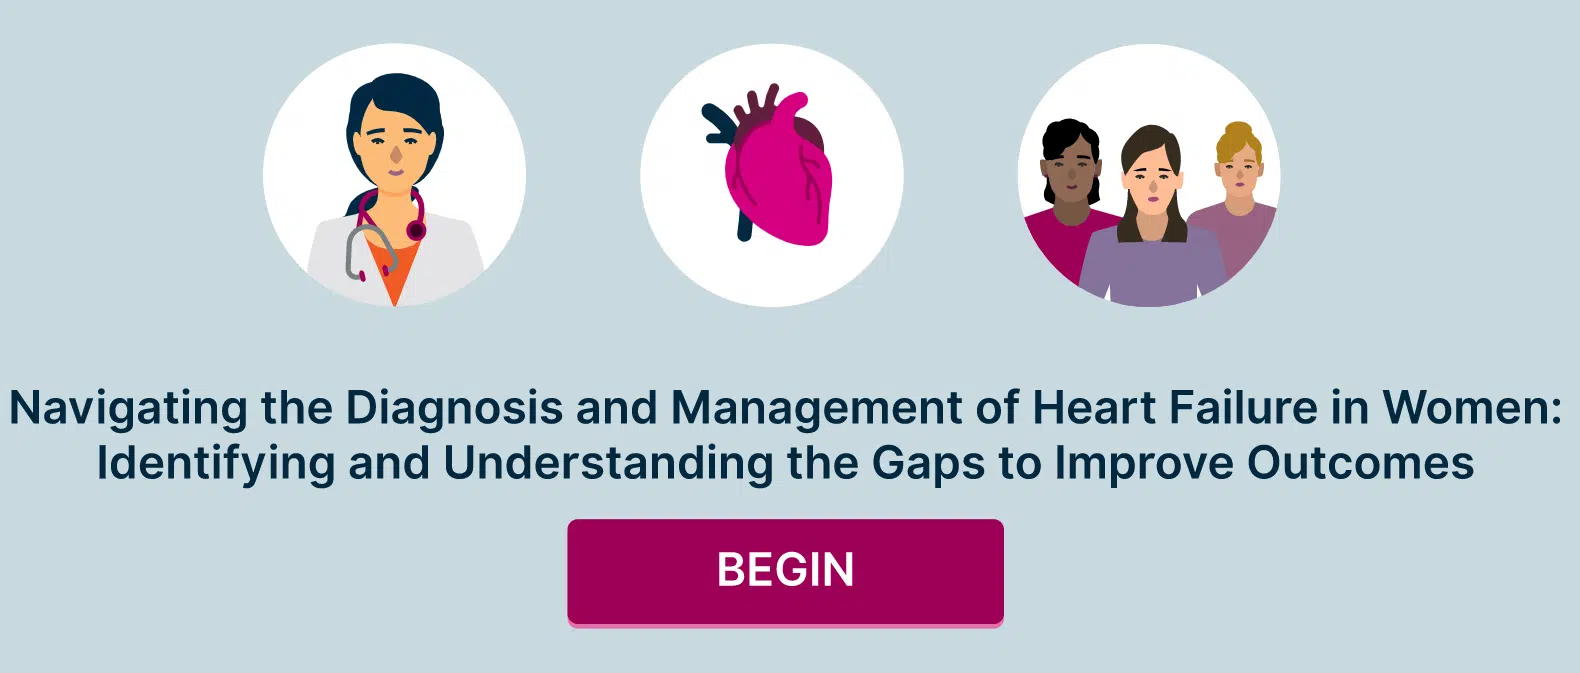 Navigating the Diagnosis and Management of Heart Failure in Women